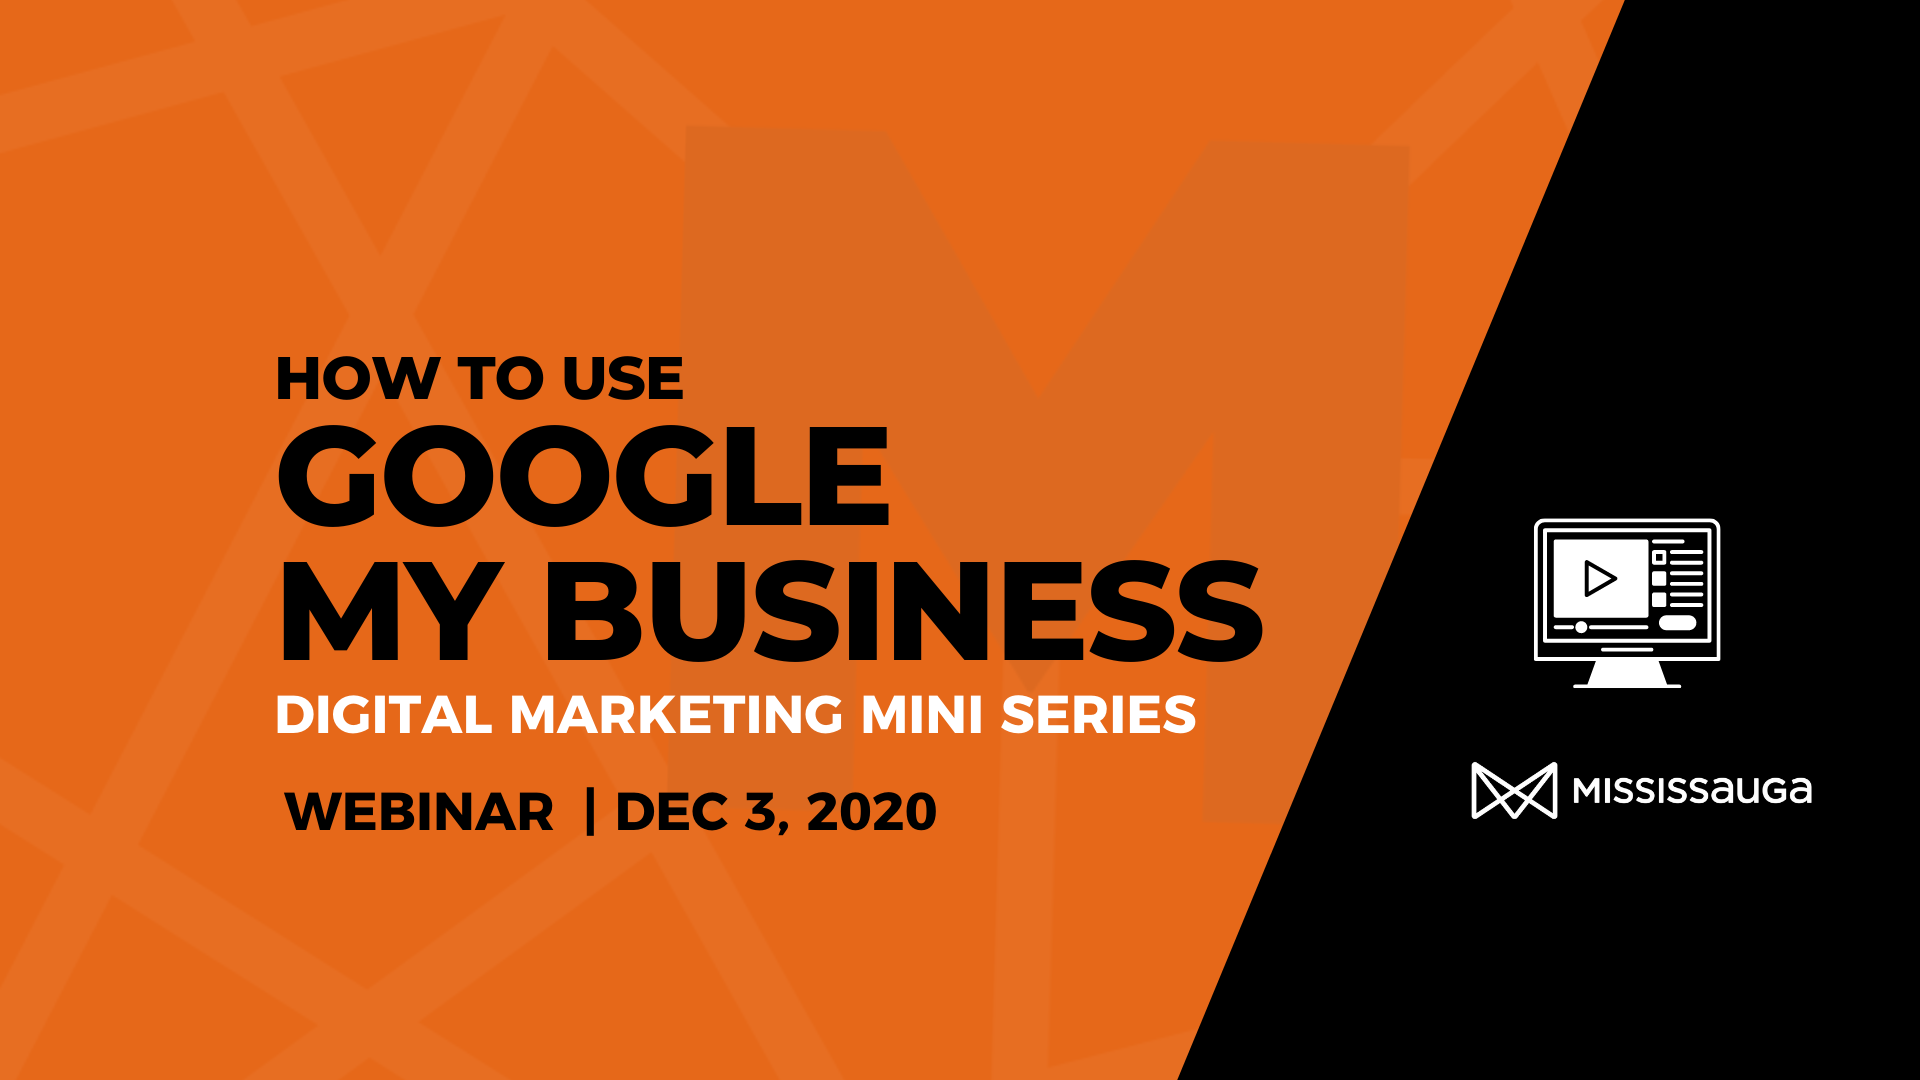 You are currently viewing How to Use Google My Business – Webinar, Dec 3